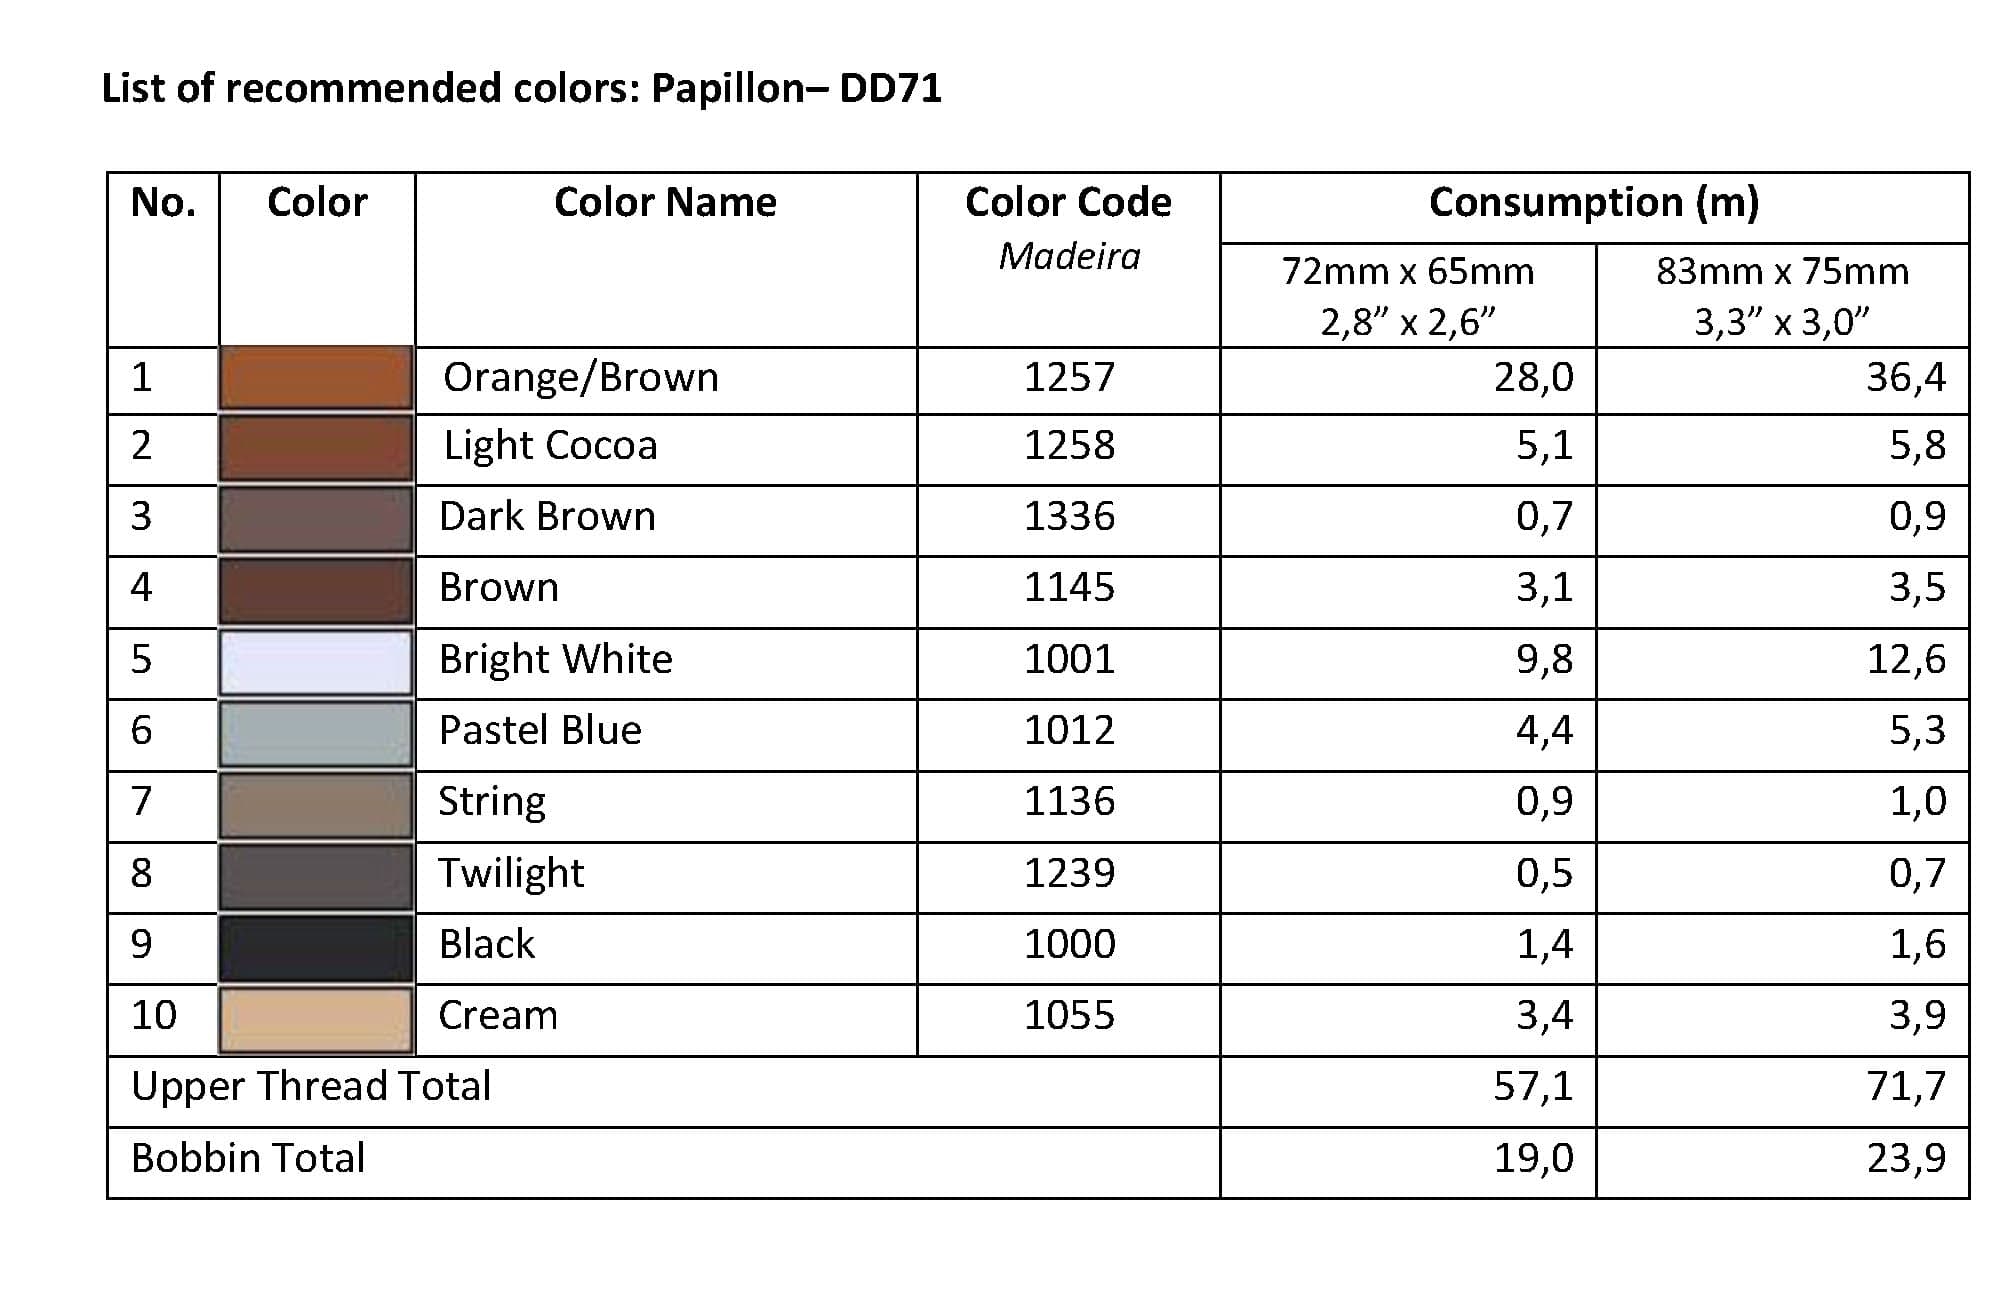 List of Recommended Colors -  Papillon DD71